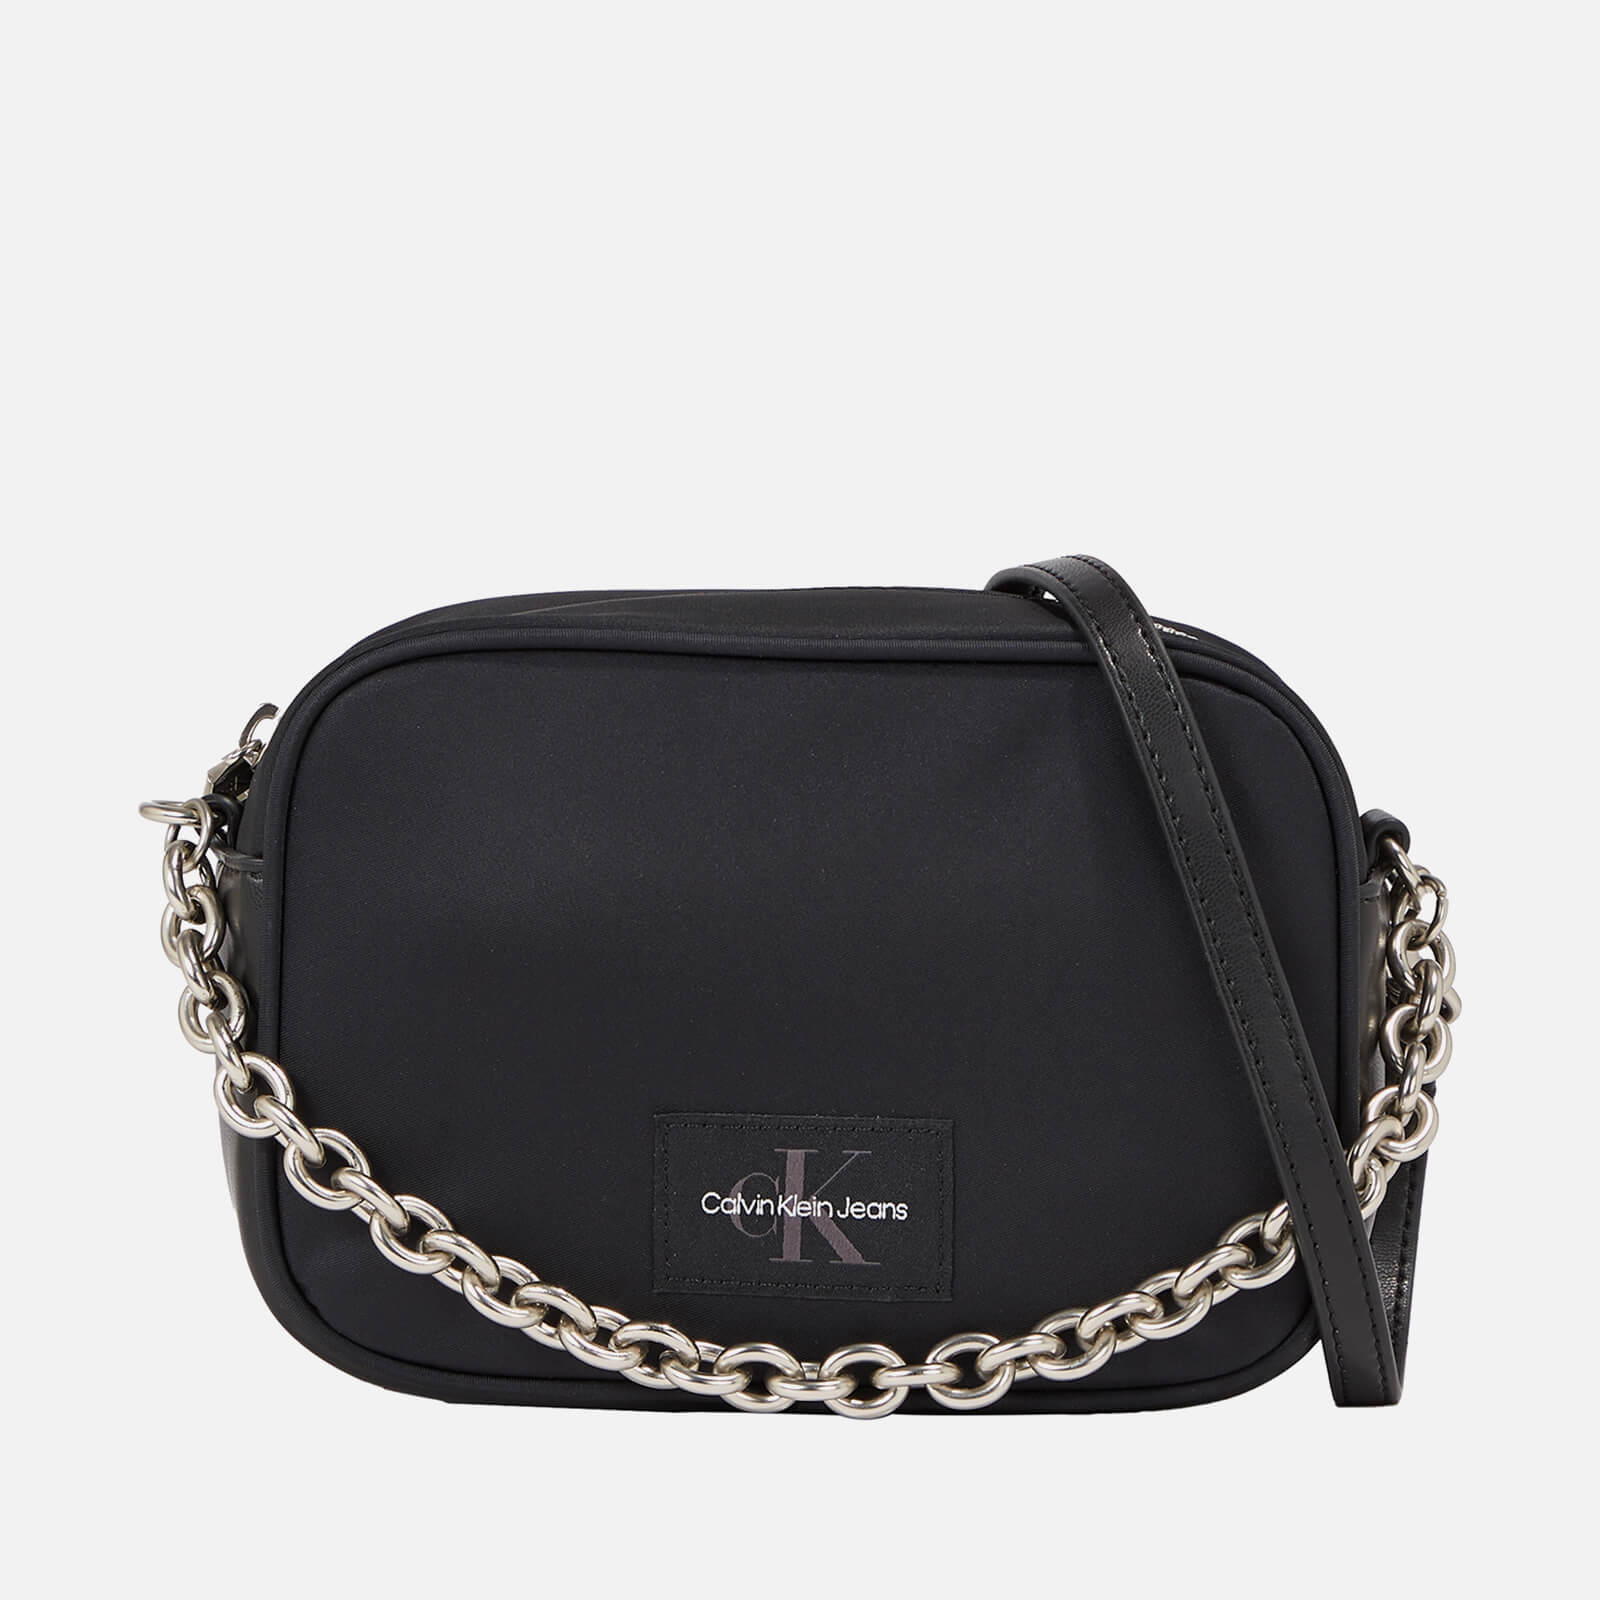 calvin klein jeans nylon and faux leather chain camera bag